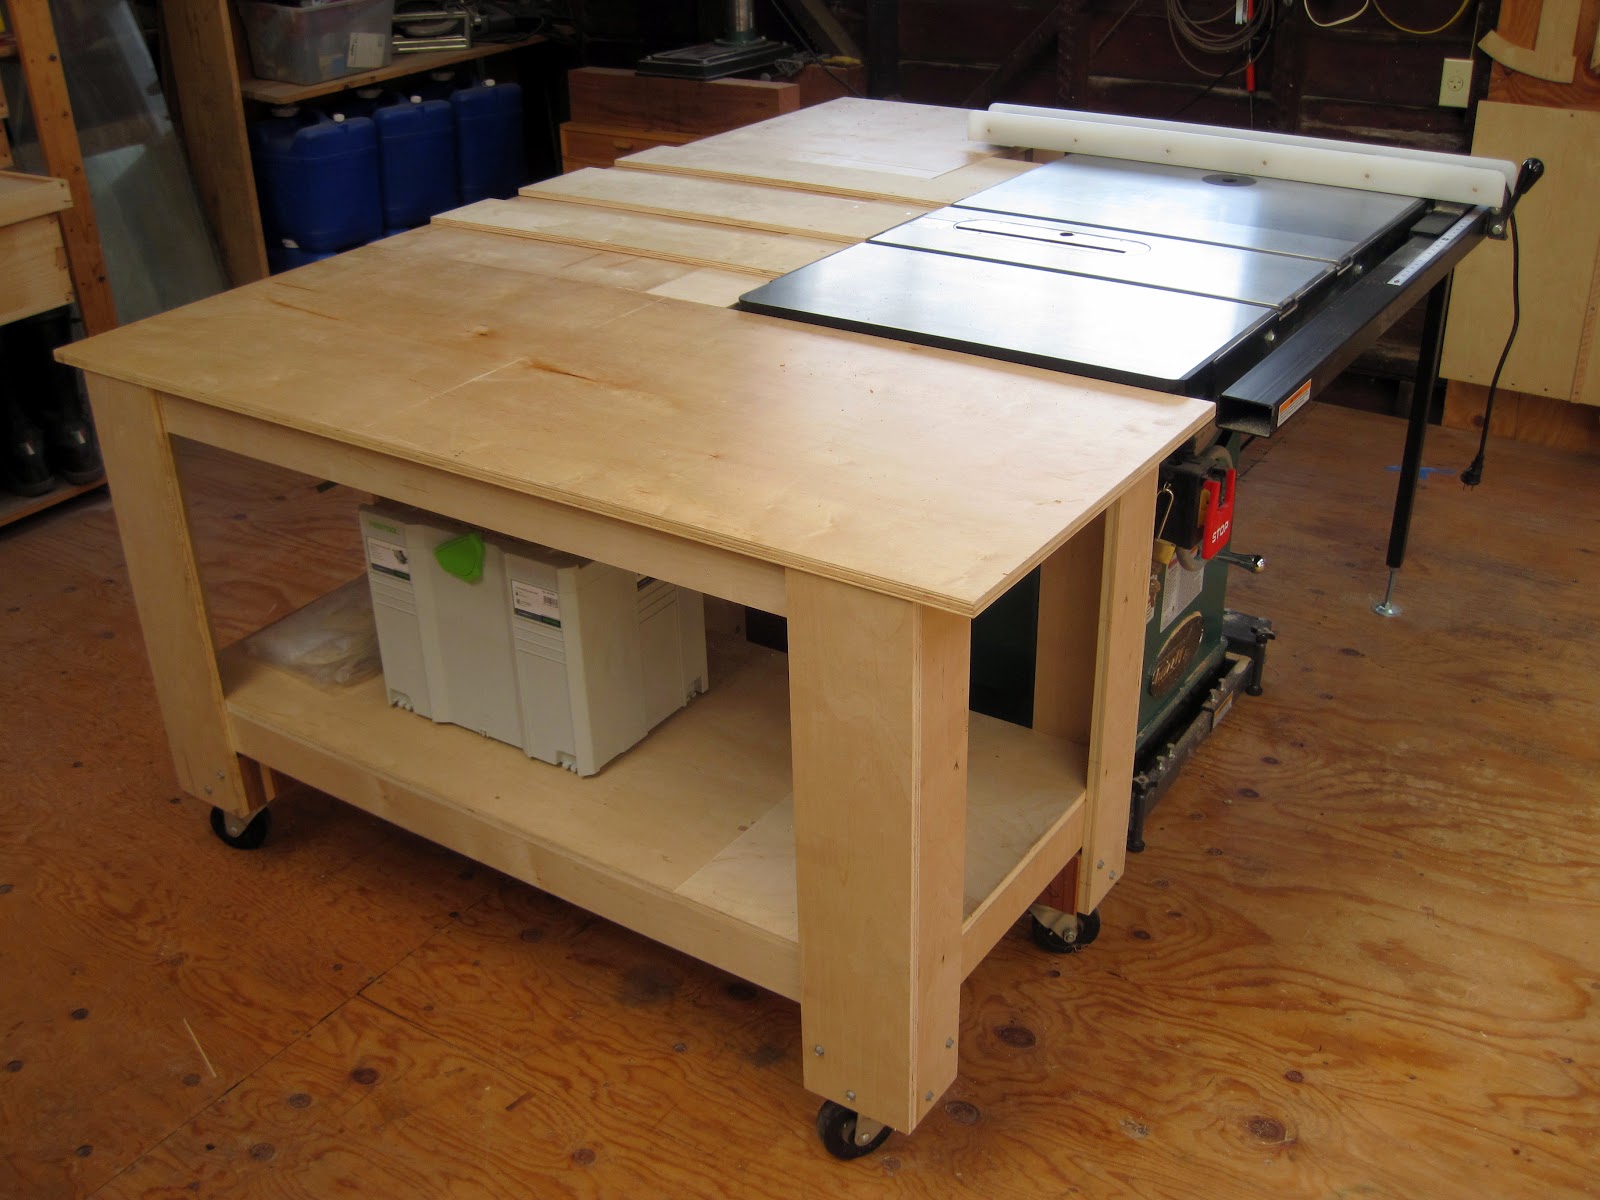 of the tables and the spacing allows for miter sleds to run through 